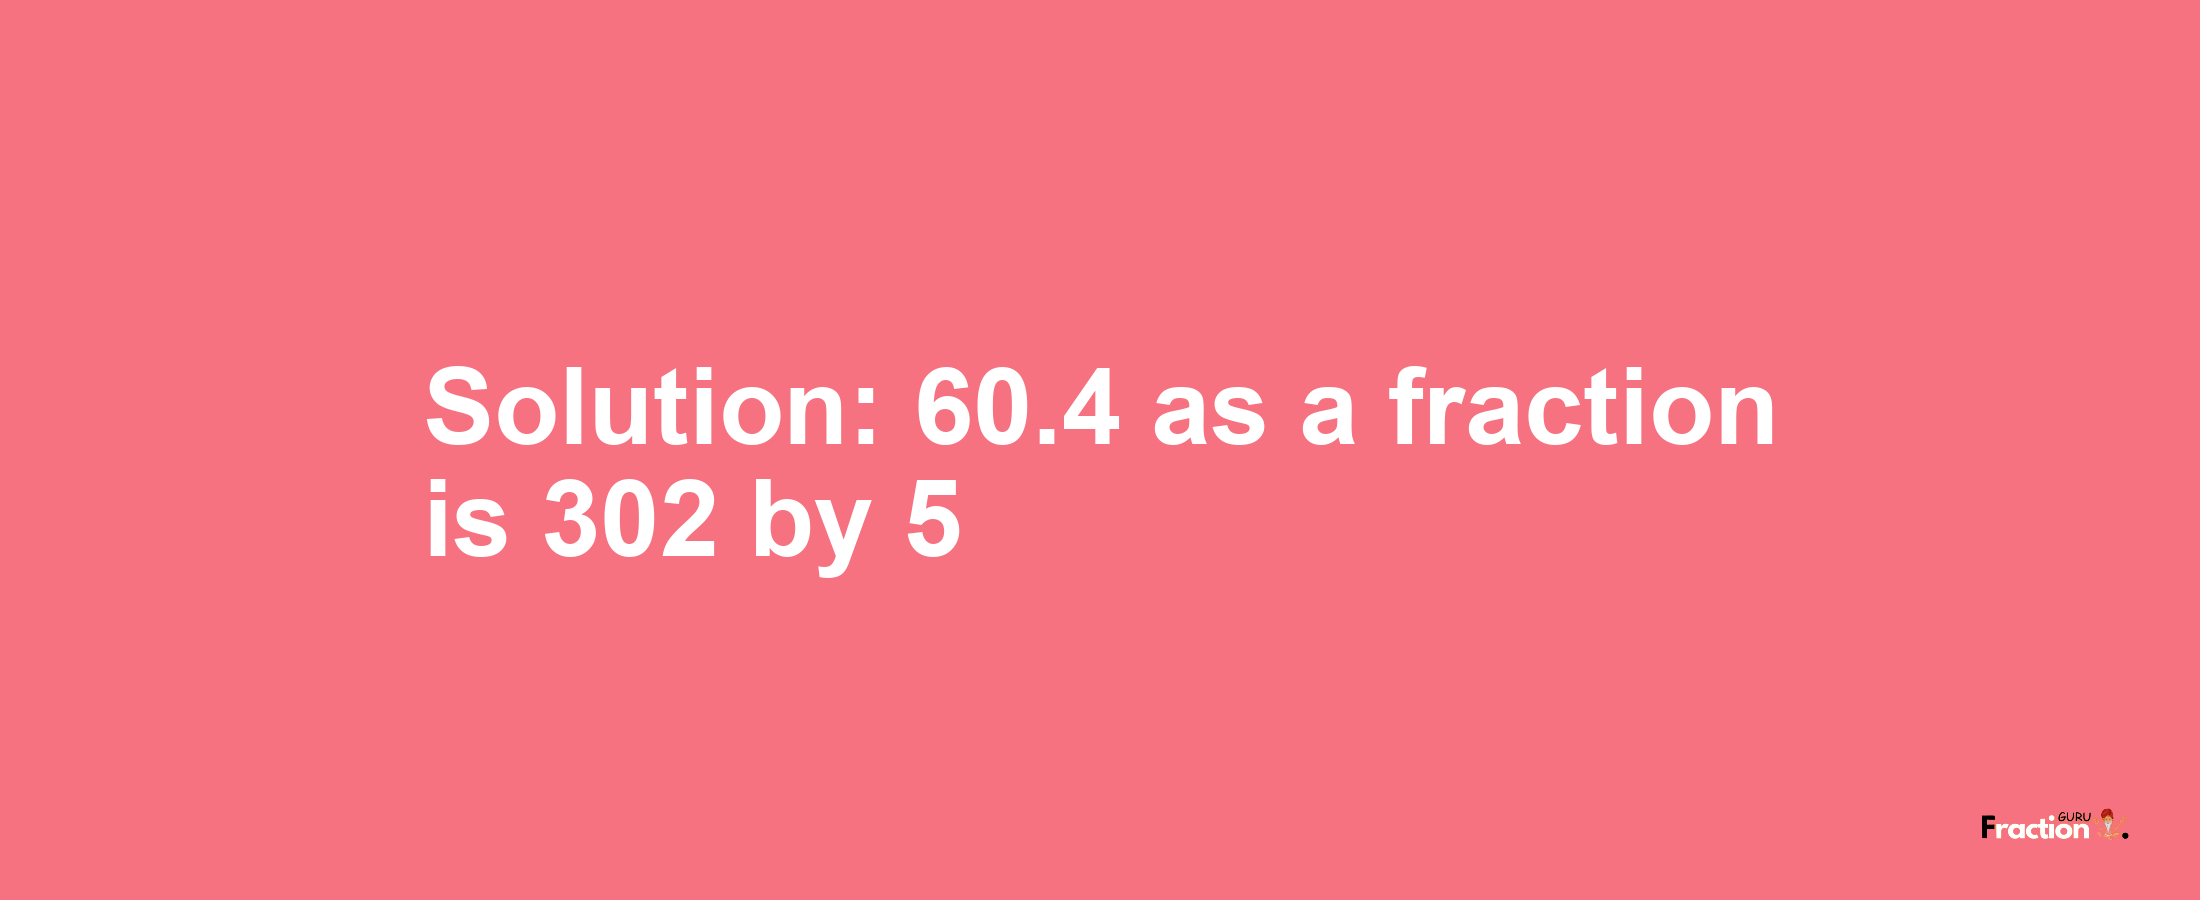 Solution:60.4 as a fraction is 302/5